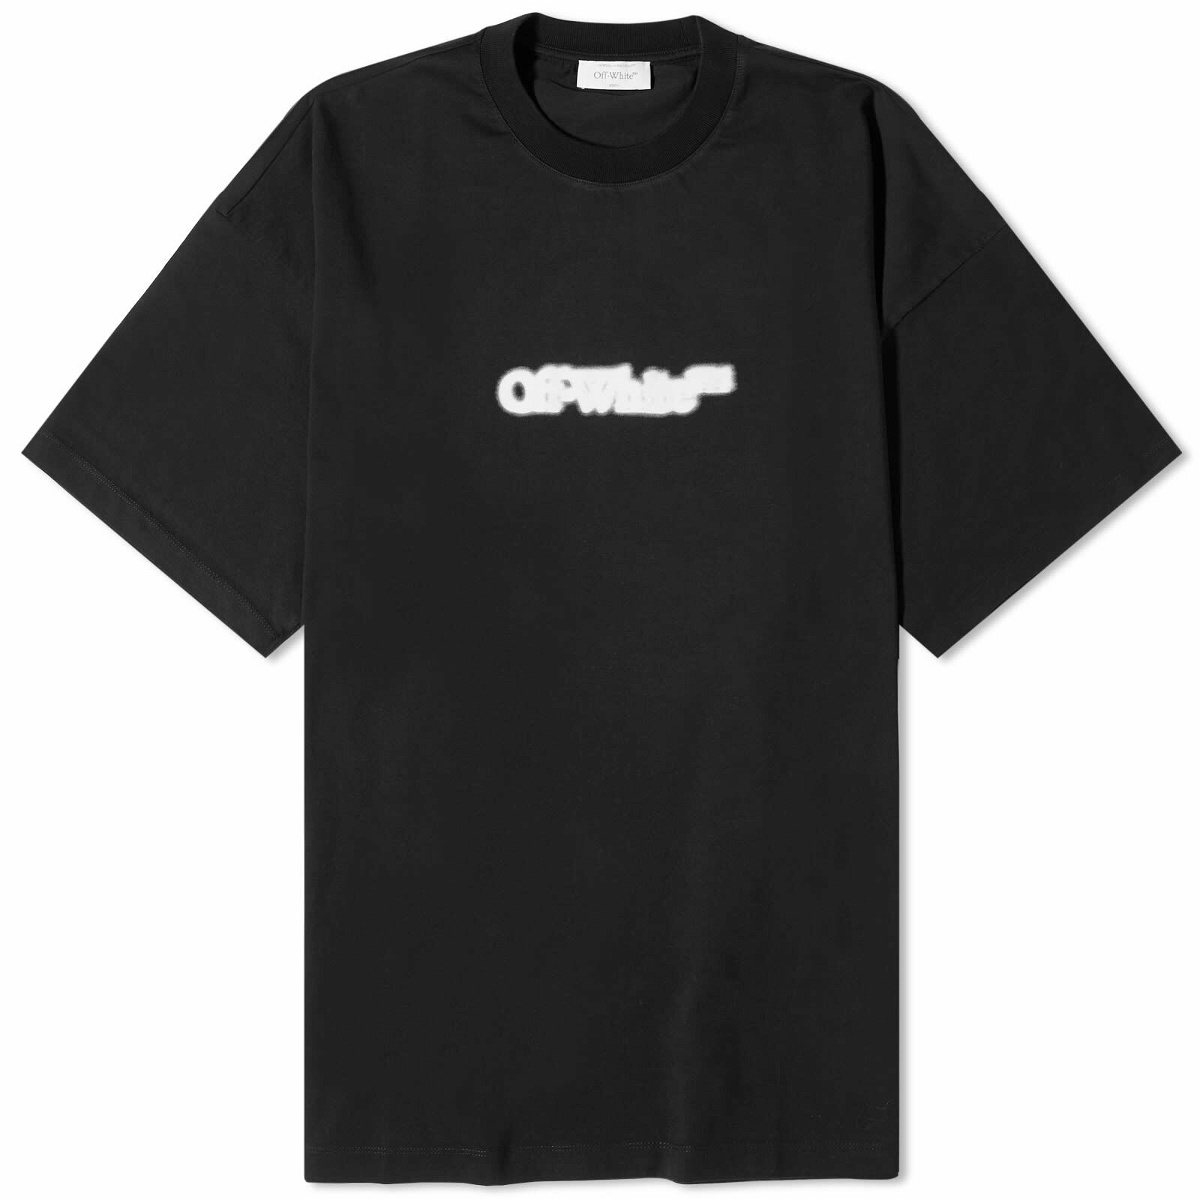 T-shirts Off-White - Off-white kids rubber arrow t-shirt -  OBAA002S23JER0012501